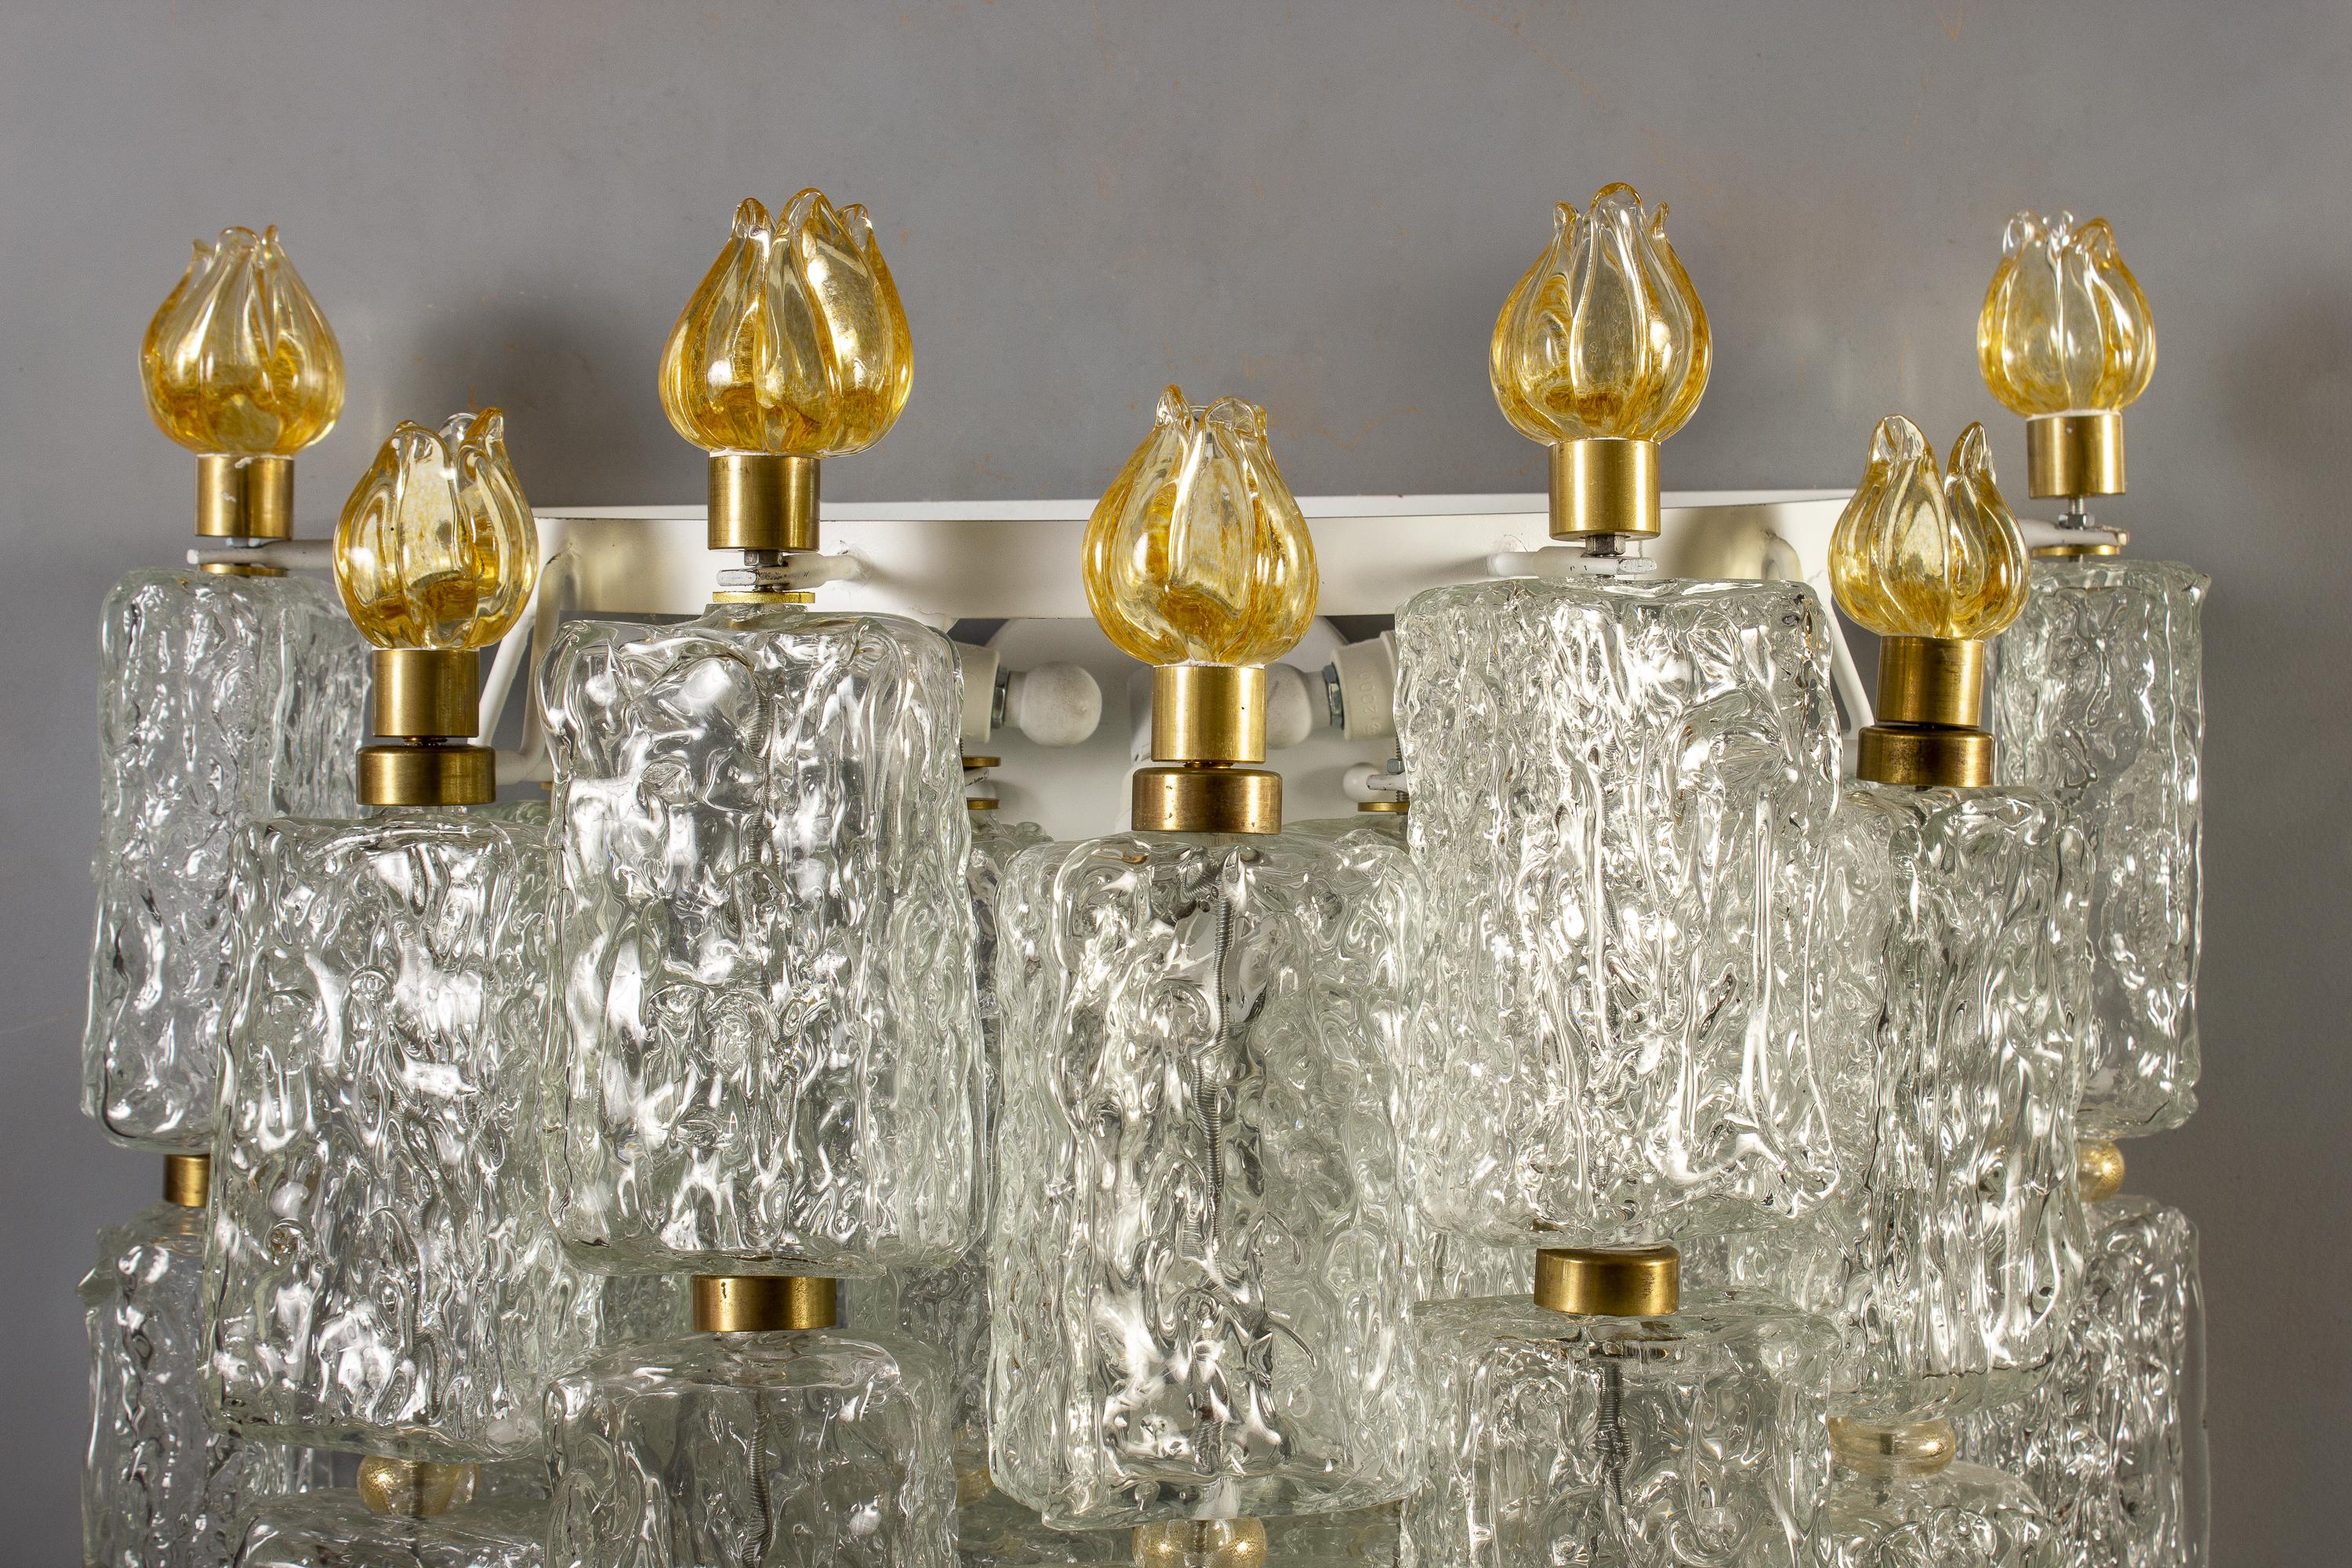 Pair of Barovier & Toso Glass Blocks with Gold Tulip Sconces, 1940 In Excellent Condition For Sale In Rome, IT